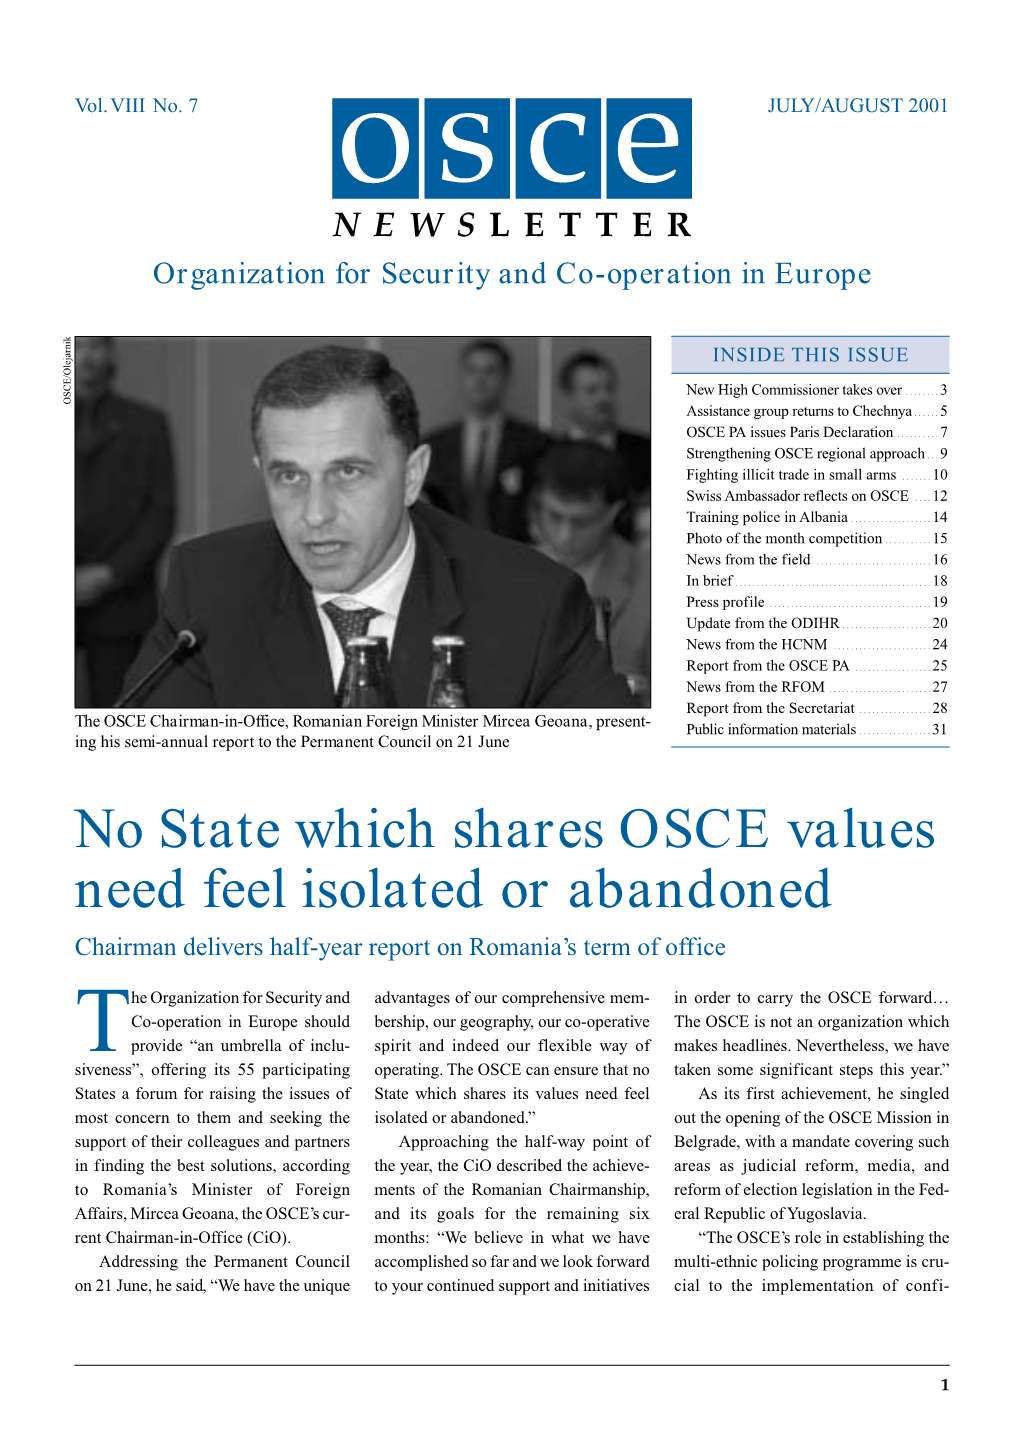 No State Which Shares OSCE Values Need Feel Isolated Or Abandoned Chairman Delivers Half-Year Report on Romania’S Term of Office